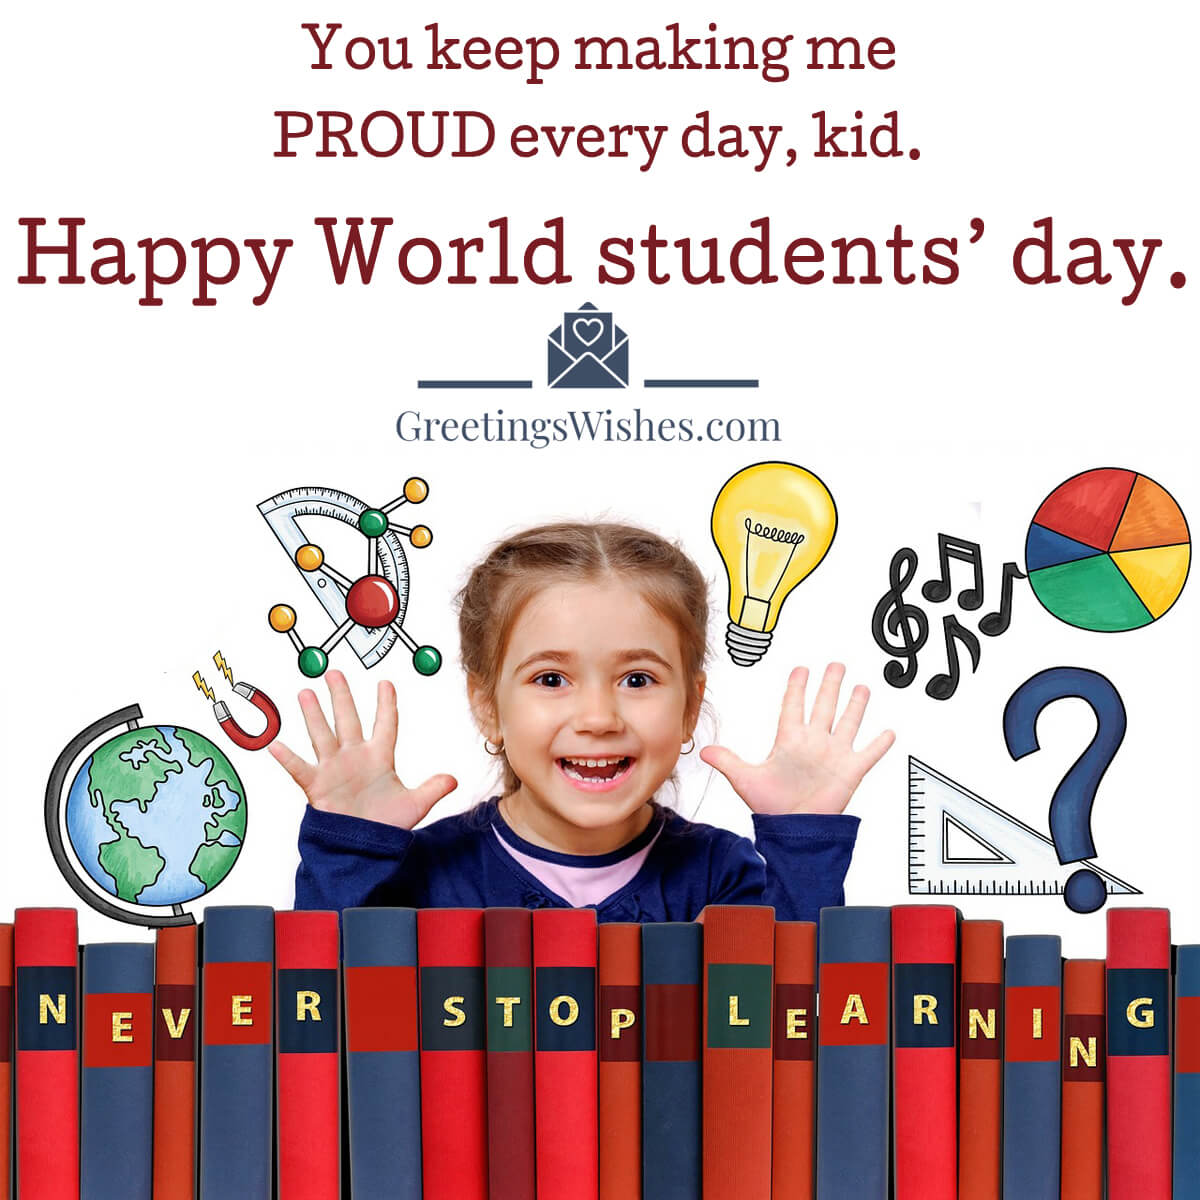 World Student’s Day Message